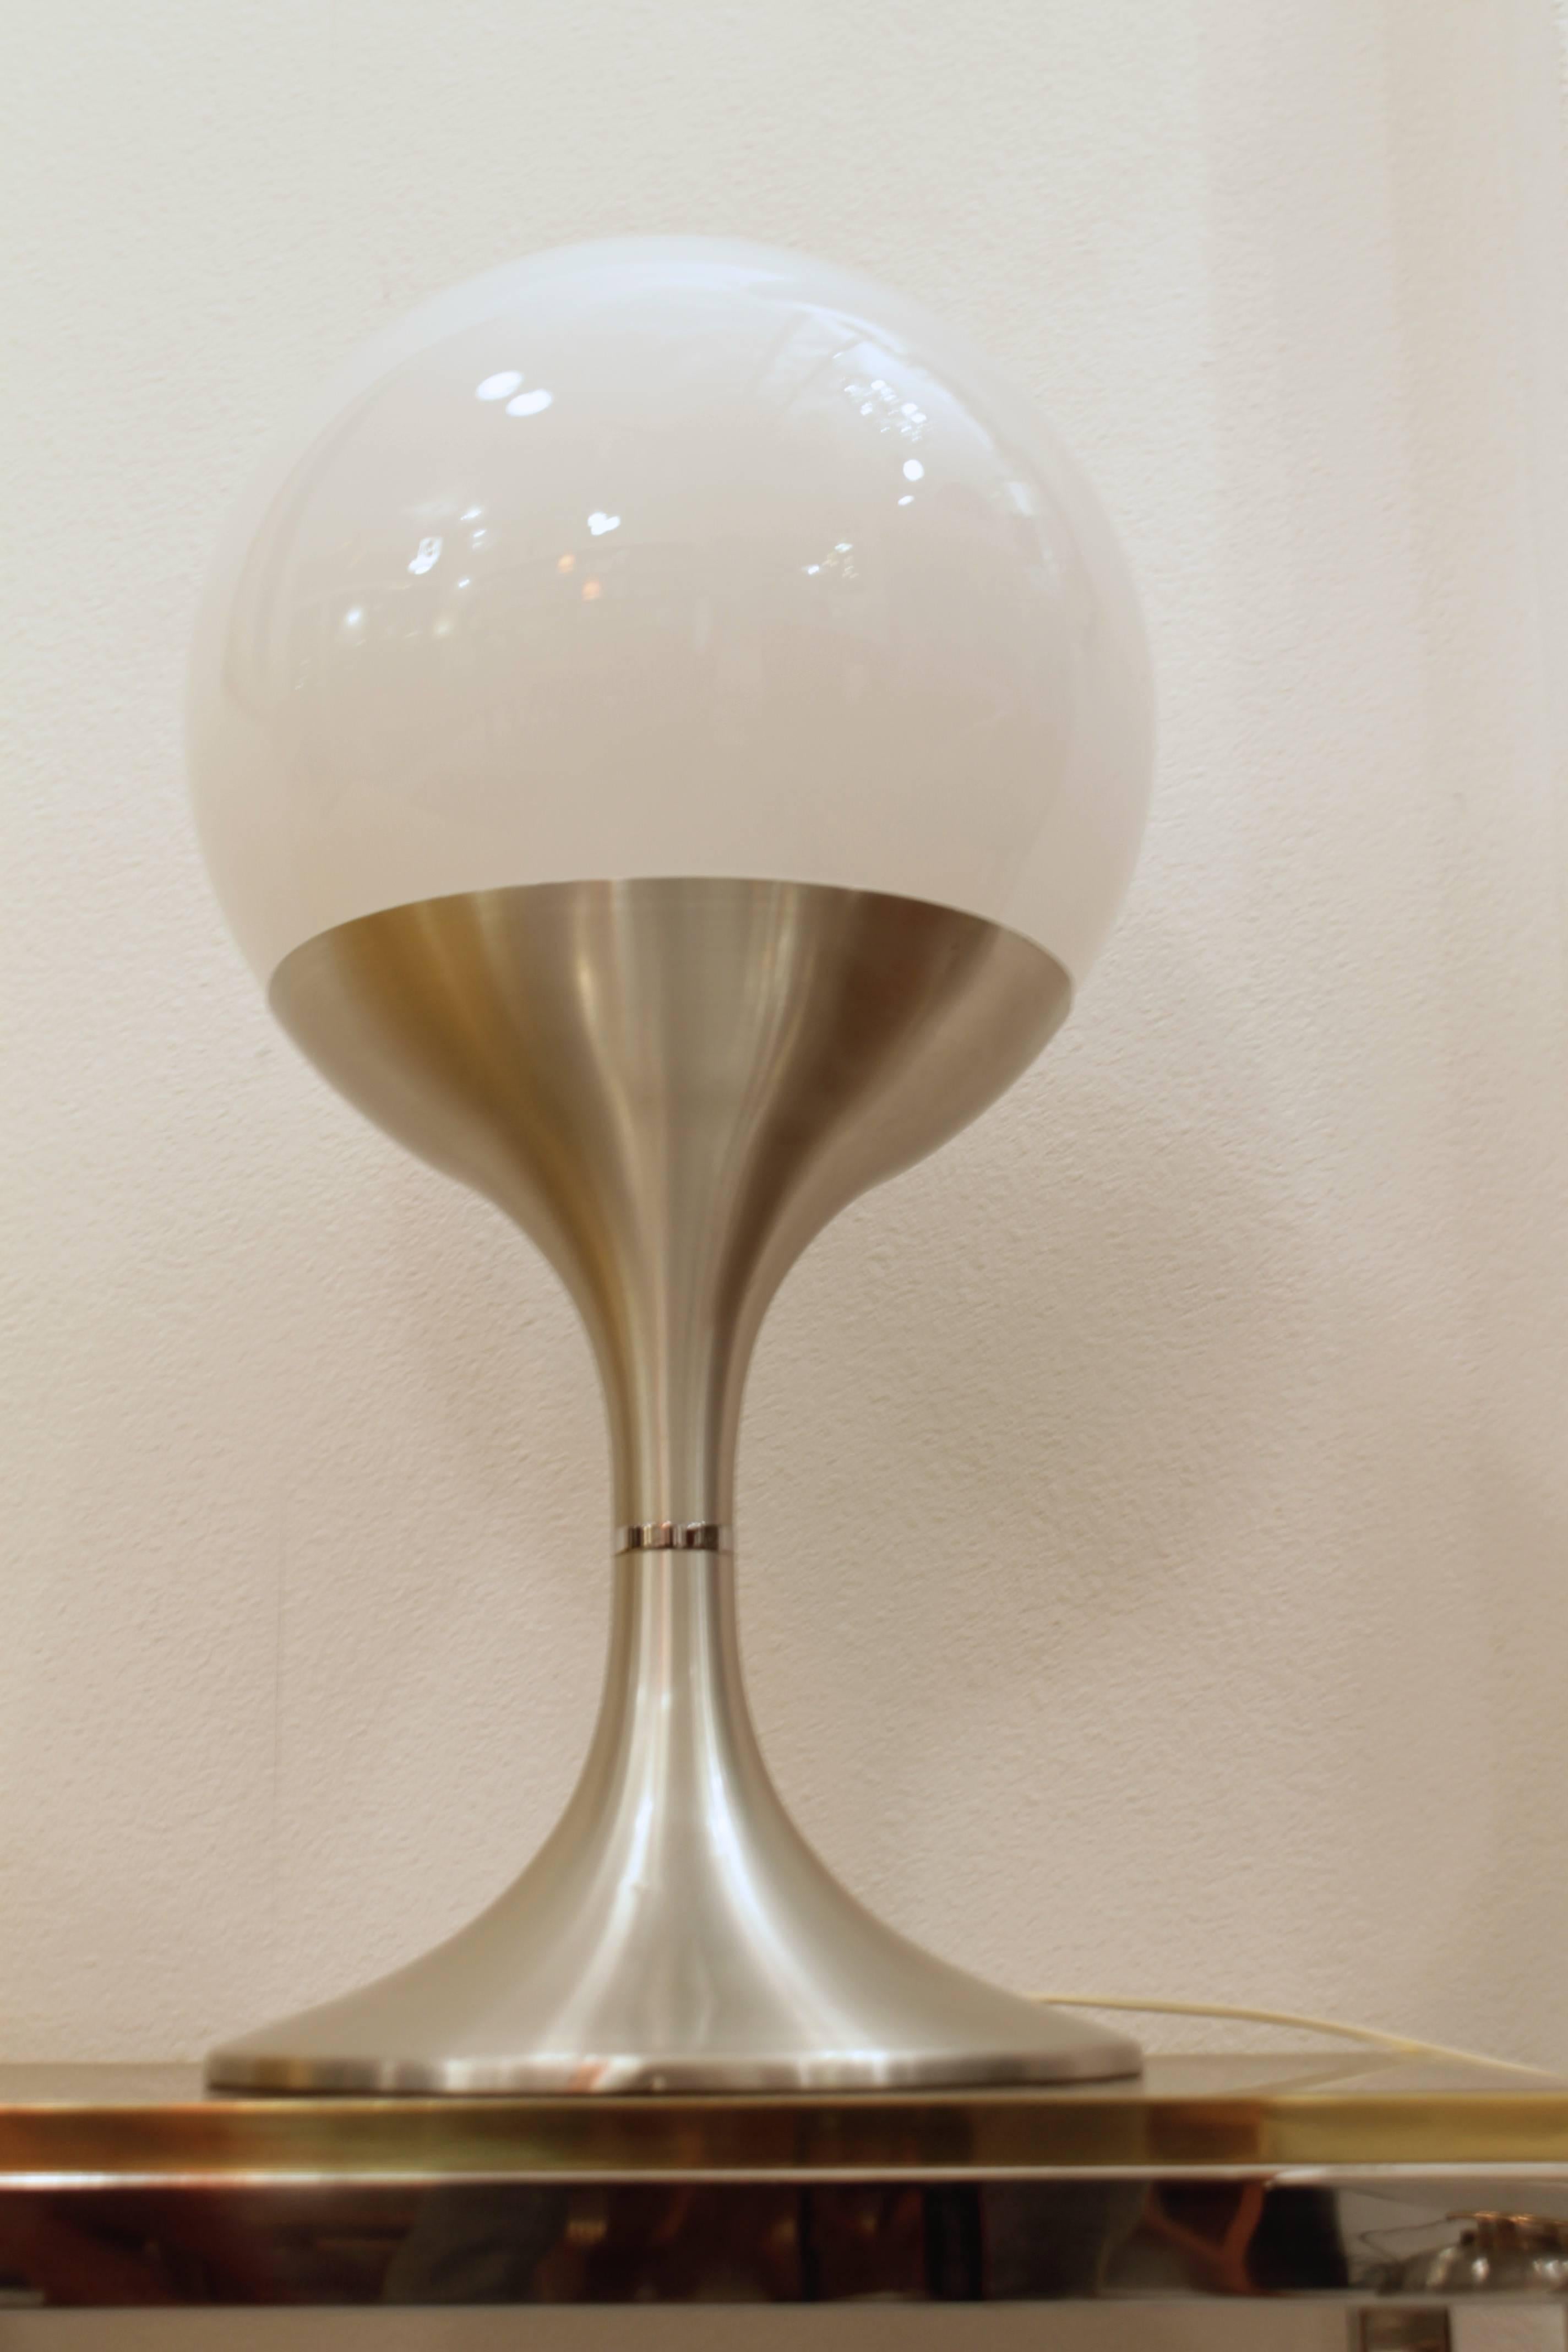 Brushed aluminium and white opal glass pop table or floor lamp, circa 1970s.
Good condition.